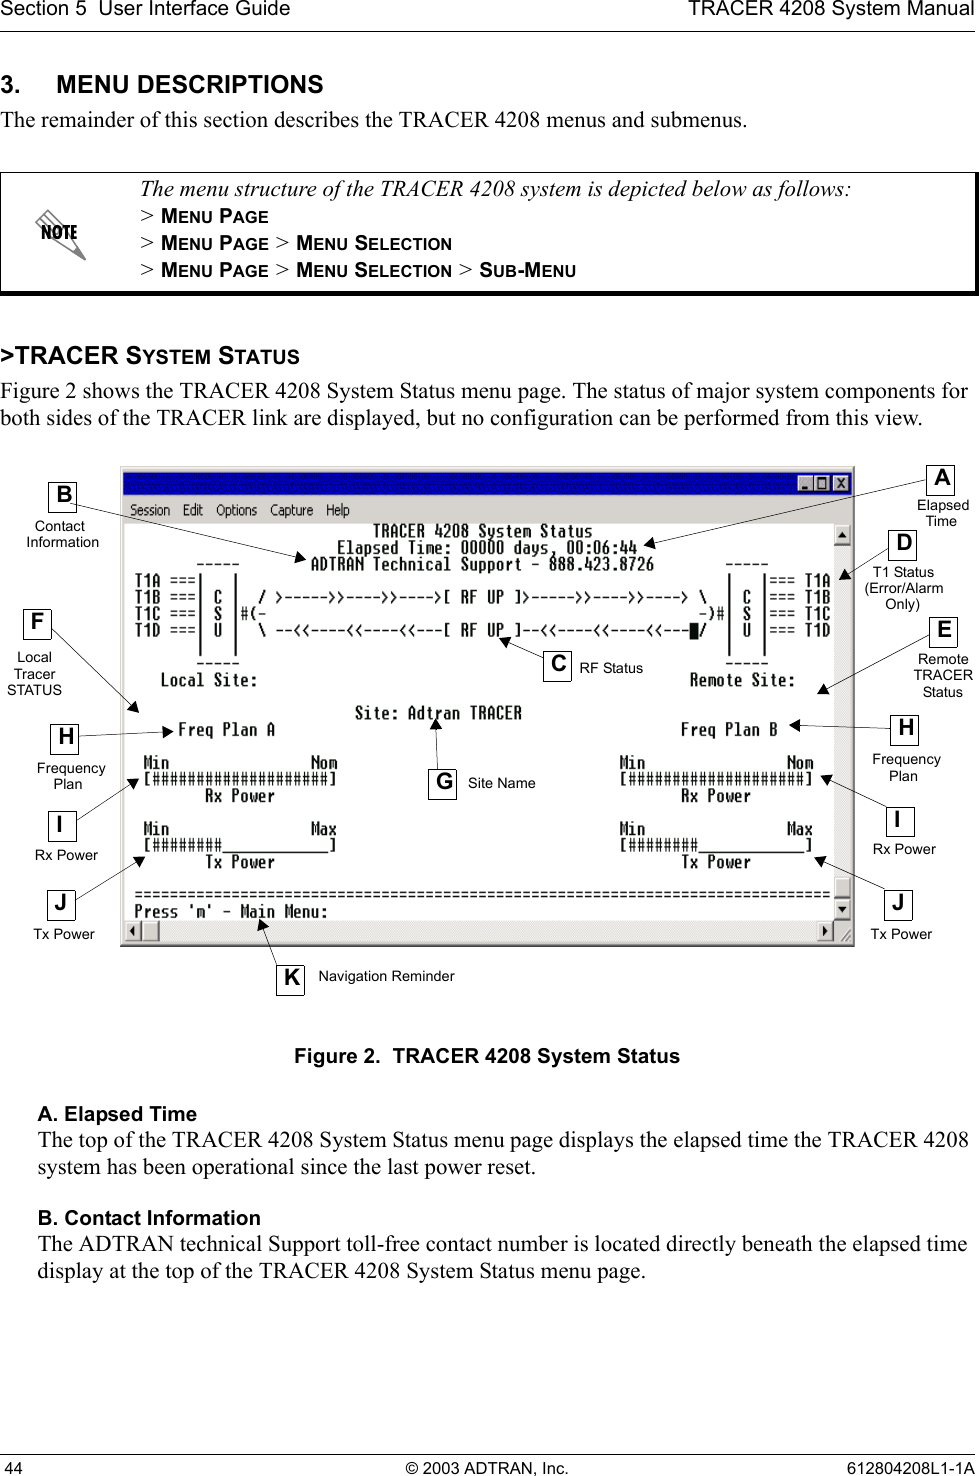 Section 5  User Interface Guide TRACER 4208 System Manual 44 © 2003 ADTRAN, Inc. 612804208L1-1A3. MENU DESCRIPTIONSThe remainder of this section describes the TRACER 4208 menus and submenus. &gt;TRACER SYSTEM STATUSFigure 2 shows the TRACER 4208 System Status menu page. The status of major system components for both sides of the TRACER link are displayed, but no configuration can be performed from this view.Figure 2.  TRACER 4208 System StatusA. Elapsed TimeThe top of the TRACER 4208 System Status menu page displays the elapsed time the TRACER 4208 system has been operational since the last power reset.B. Contact InformationThe ADTRAN technical Support toll-free contact number is located directly beneath the elapsed time display at the top of the TRACER 4208 System Status menu page.The menu structure of the TRACER 4208 system is depicted below as follows:&gt; MENU PAGE&gt; MENU PAGE &gt; MENU SELECTION&gt; MENU PAGE &gt; MENU SELECTION &gt; SUB-MENUAElapsedTimeBContactInformationFLocalHFrequencyIRx PowerCRF StatusGDT1 StatusERemoteHIRx PowerJTx PowerJTx PowerKNavigation Reminder(Error/AlarmOnly)TracerSTATUSPlanFrequencyPlanTRACERStatusSite Name